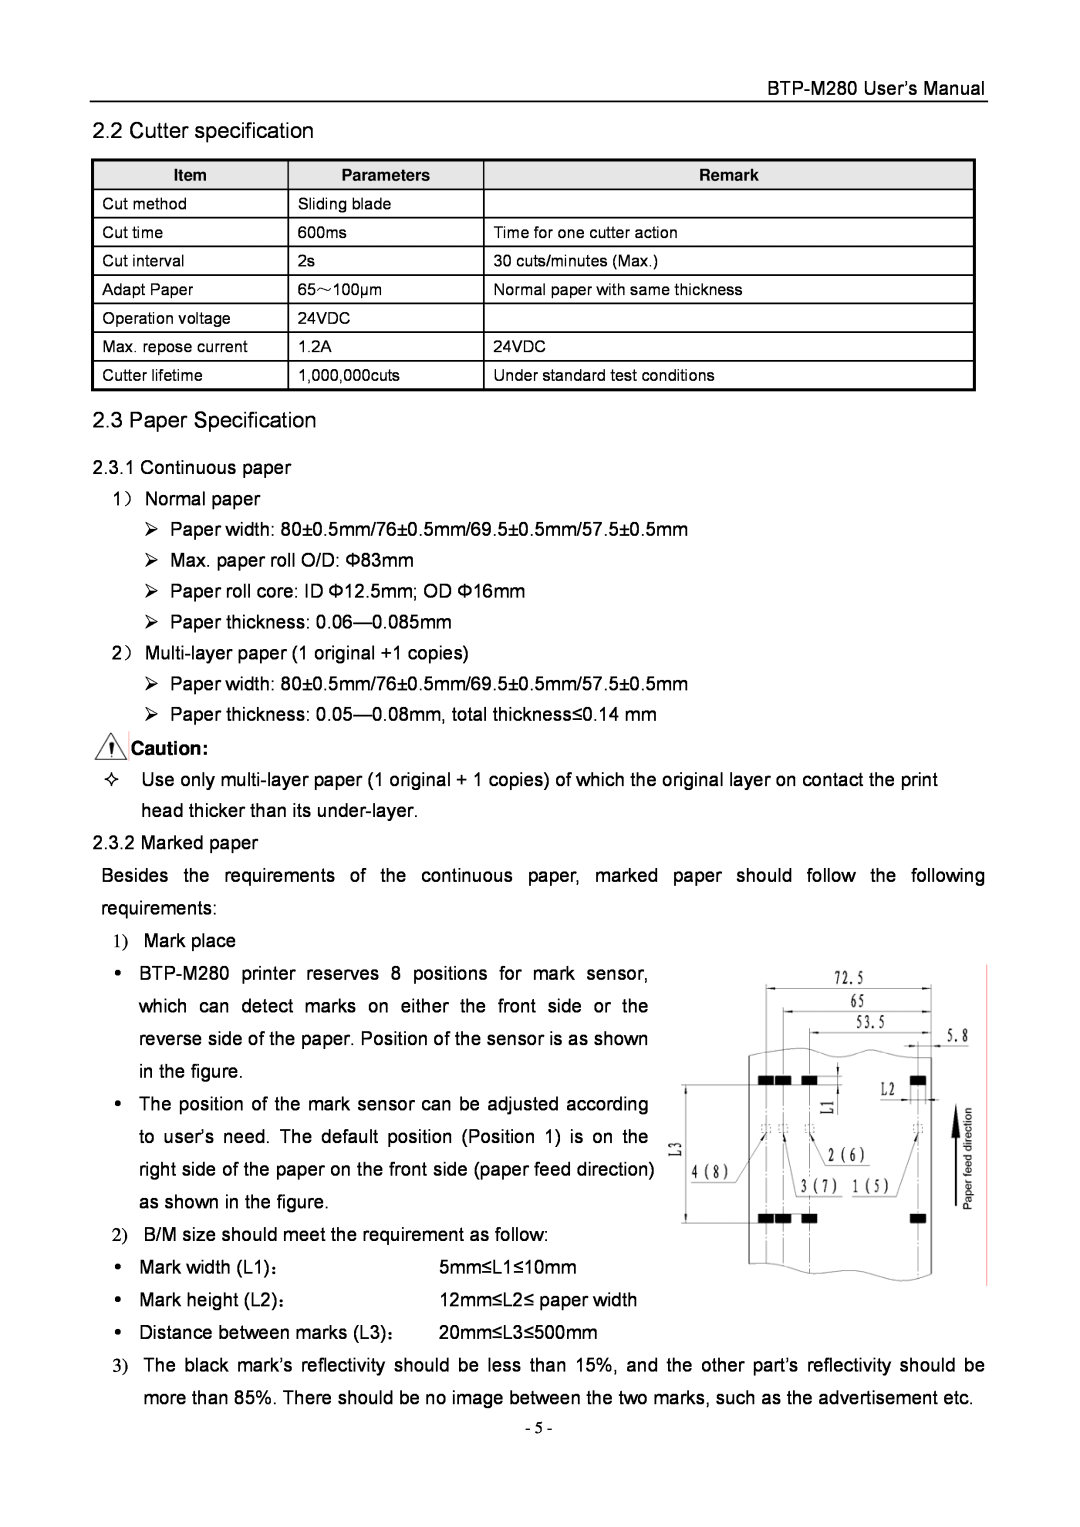 Jiaye General Merchandise Co BTP-M280 user manual Cutter specification, Paper Specification, Parameters, Remark 